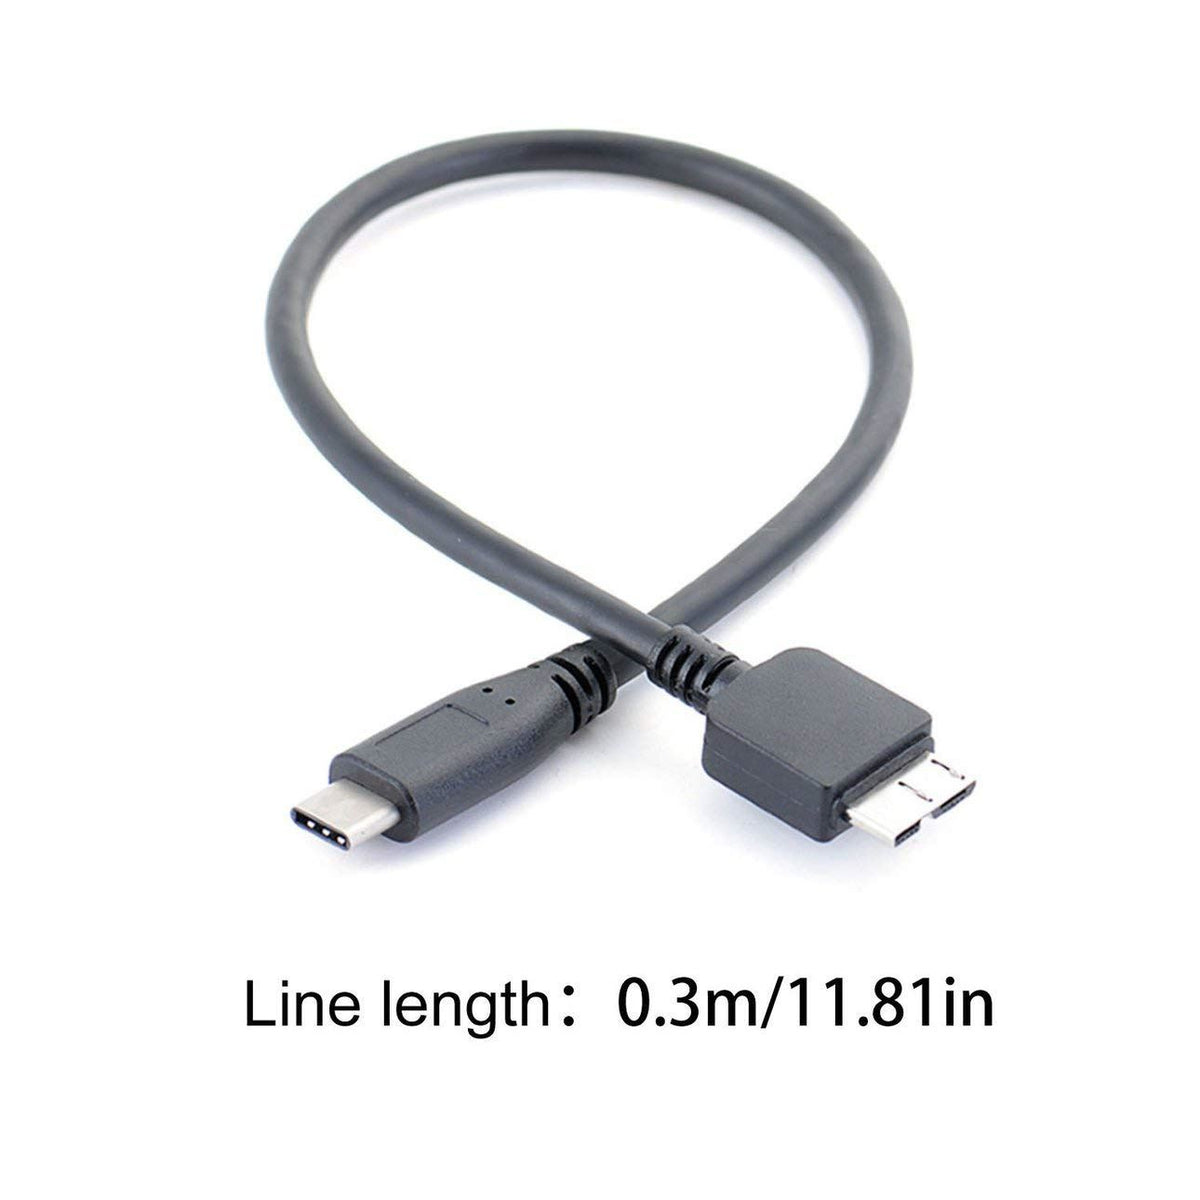 USB to USB C 3.1 USB Cable for Seagate Expansion External Hard Drive 4 TB, Black Hellfire Trading